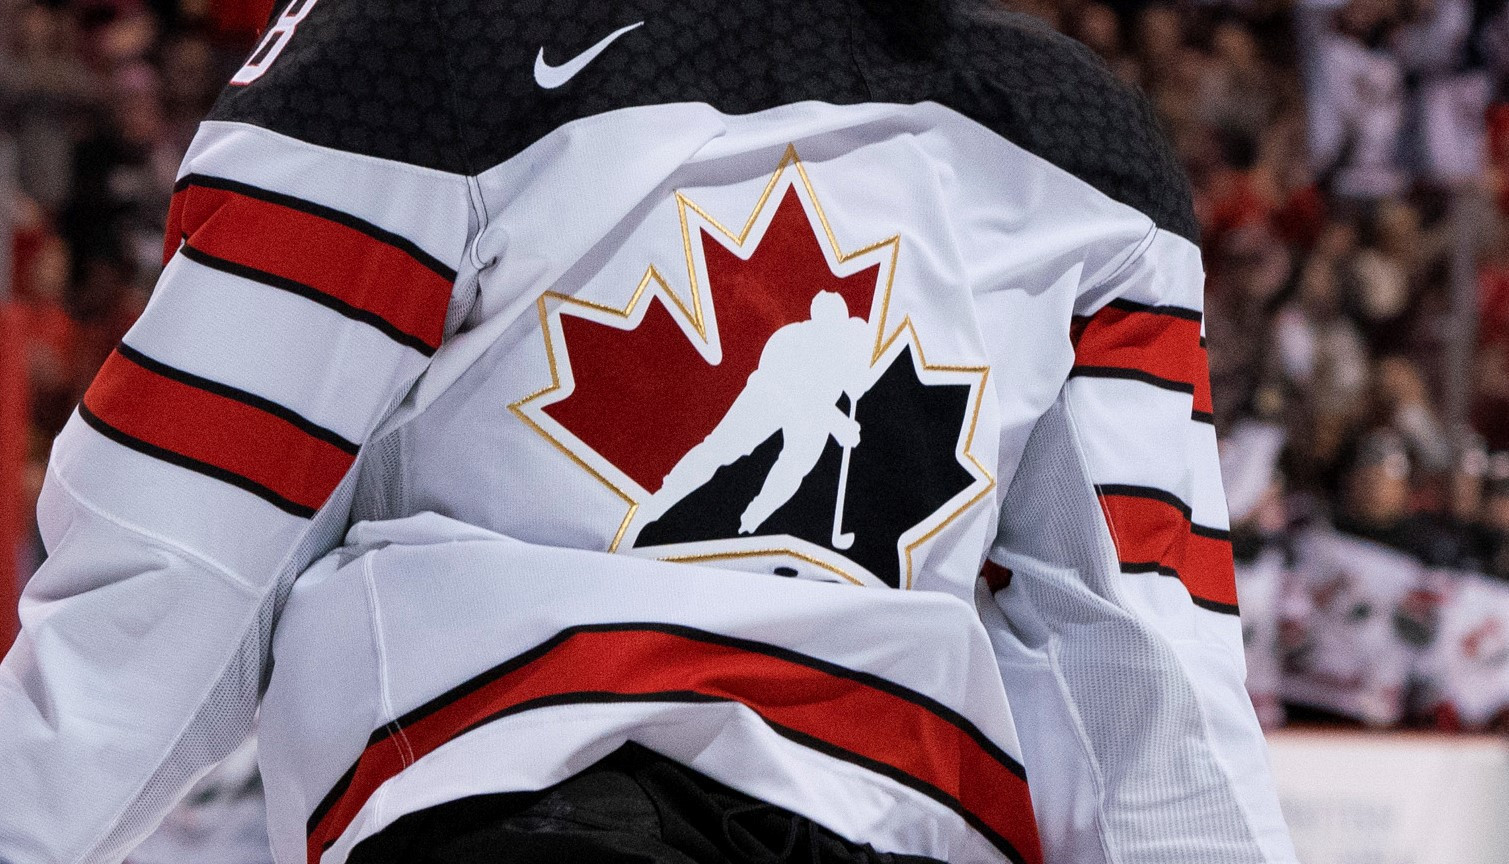 Hockey Canada officials must "take responsibility" for crisis says Sports Minister